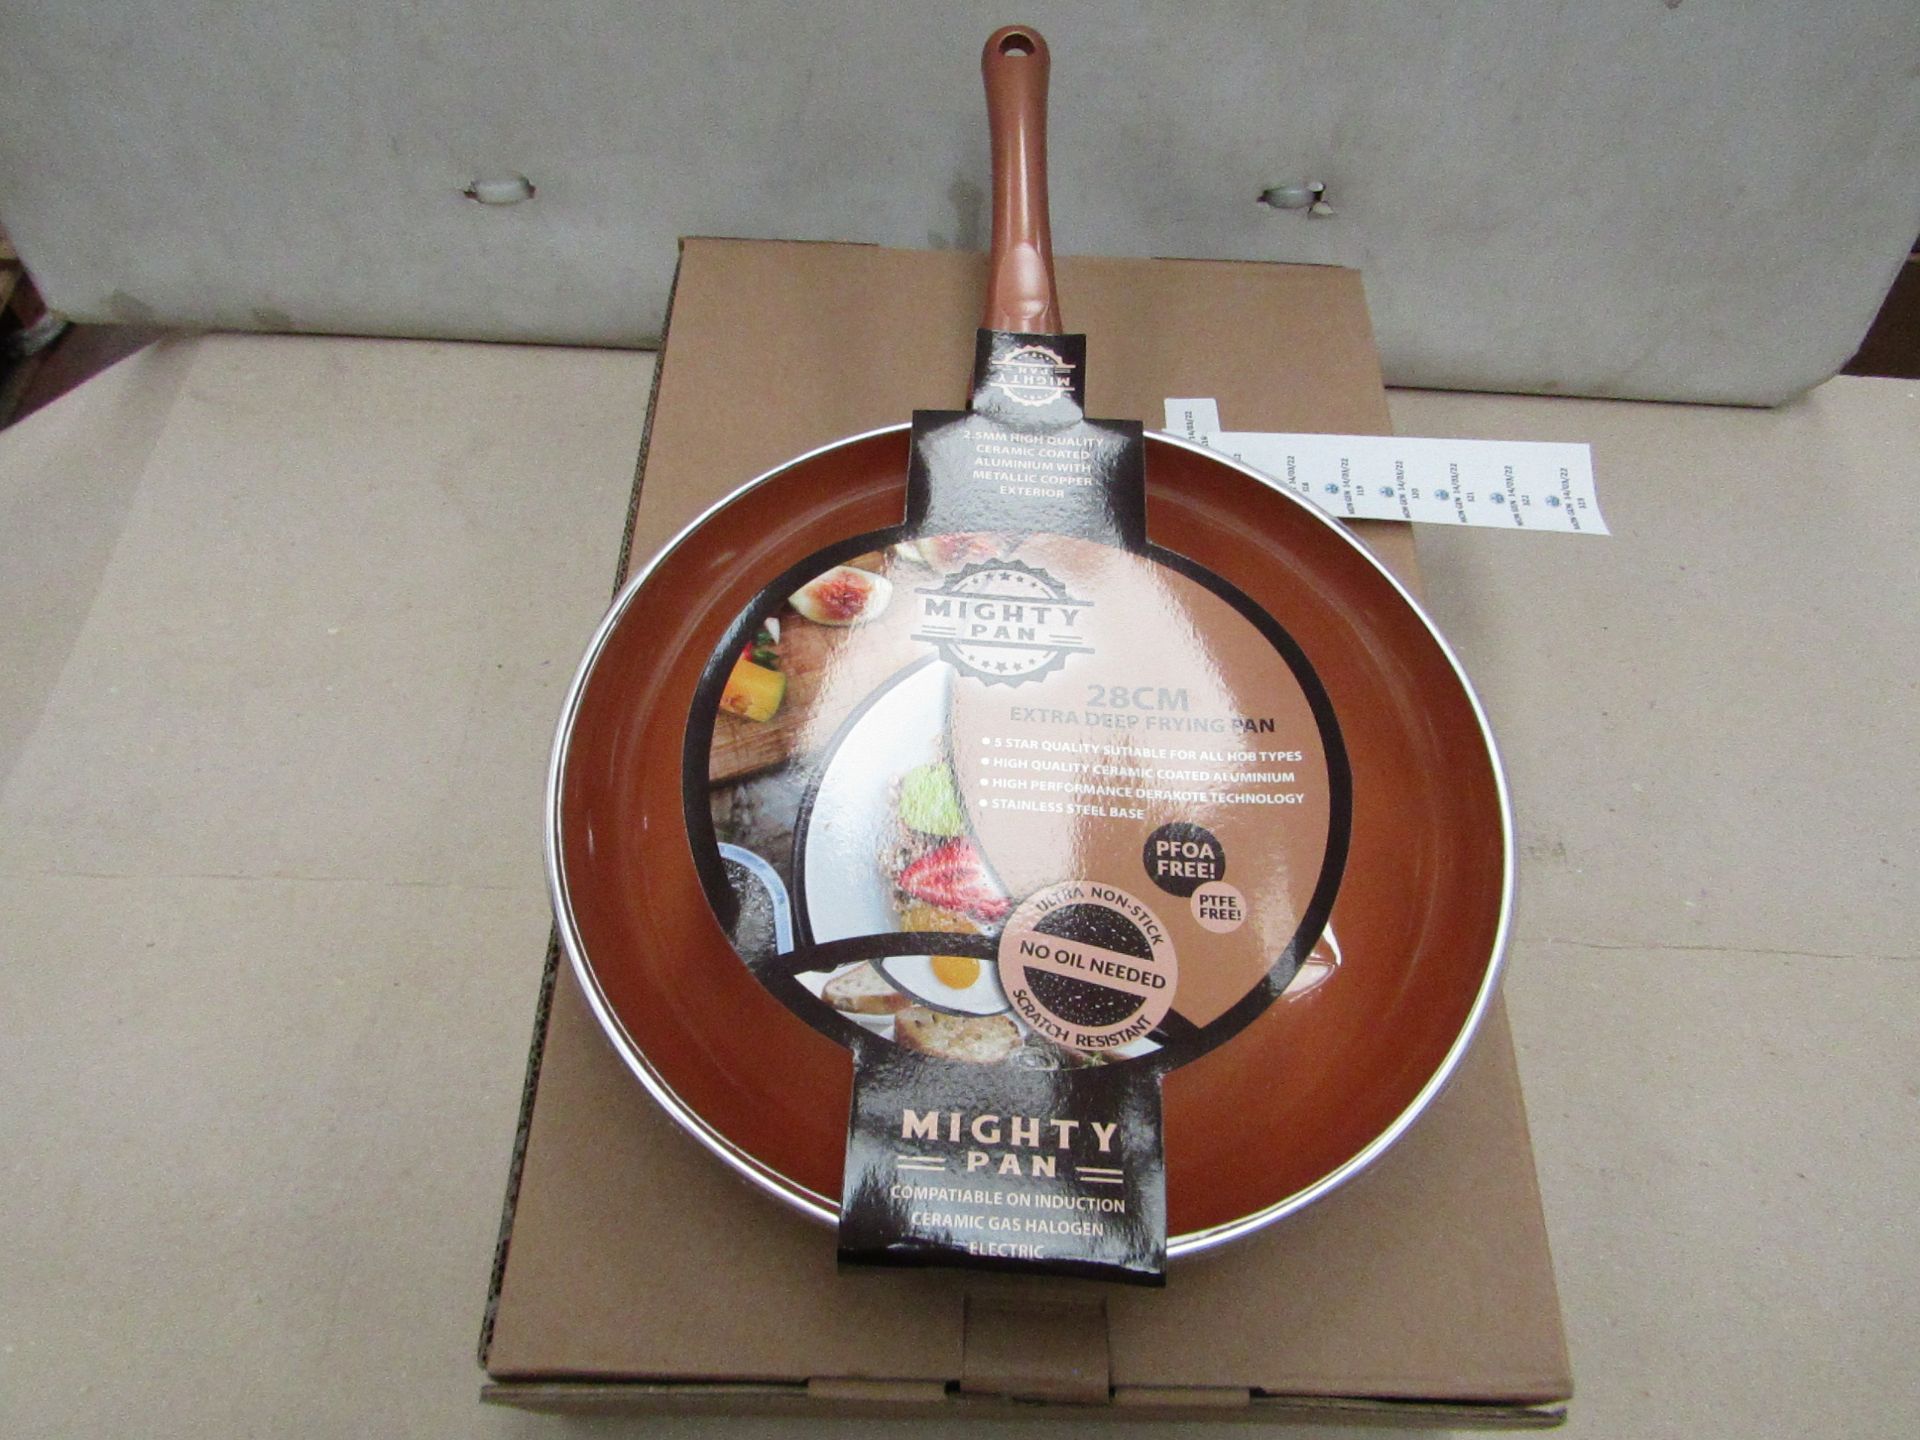 Mighty Pan - Extra Deep Non-Stick Scratch Resistant ( 28cm ) Frying Pan - New & Boxed.